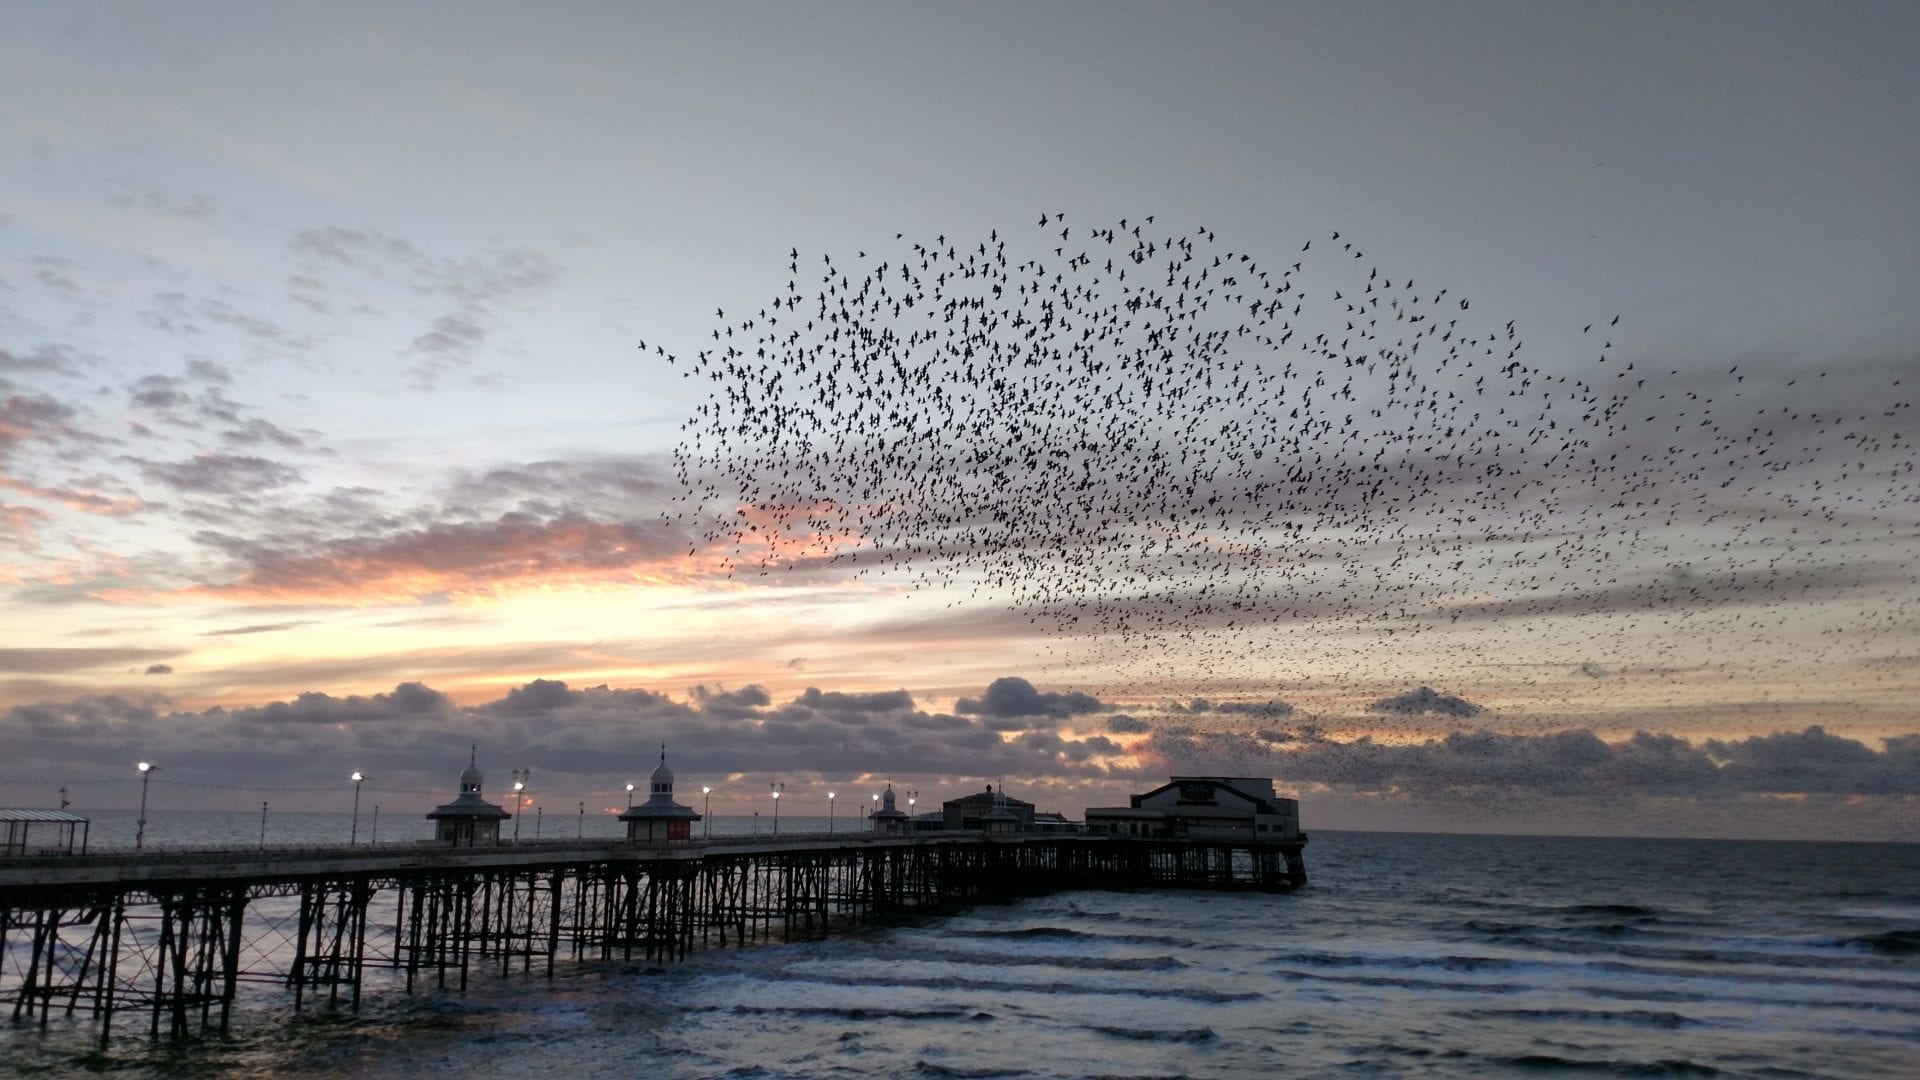 Starlings and North Pier at sunset by Neil Curtis from Wolverhampton